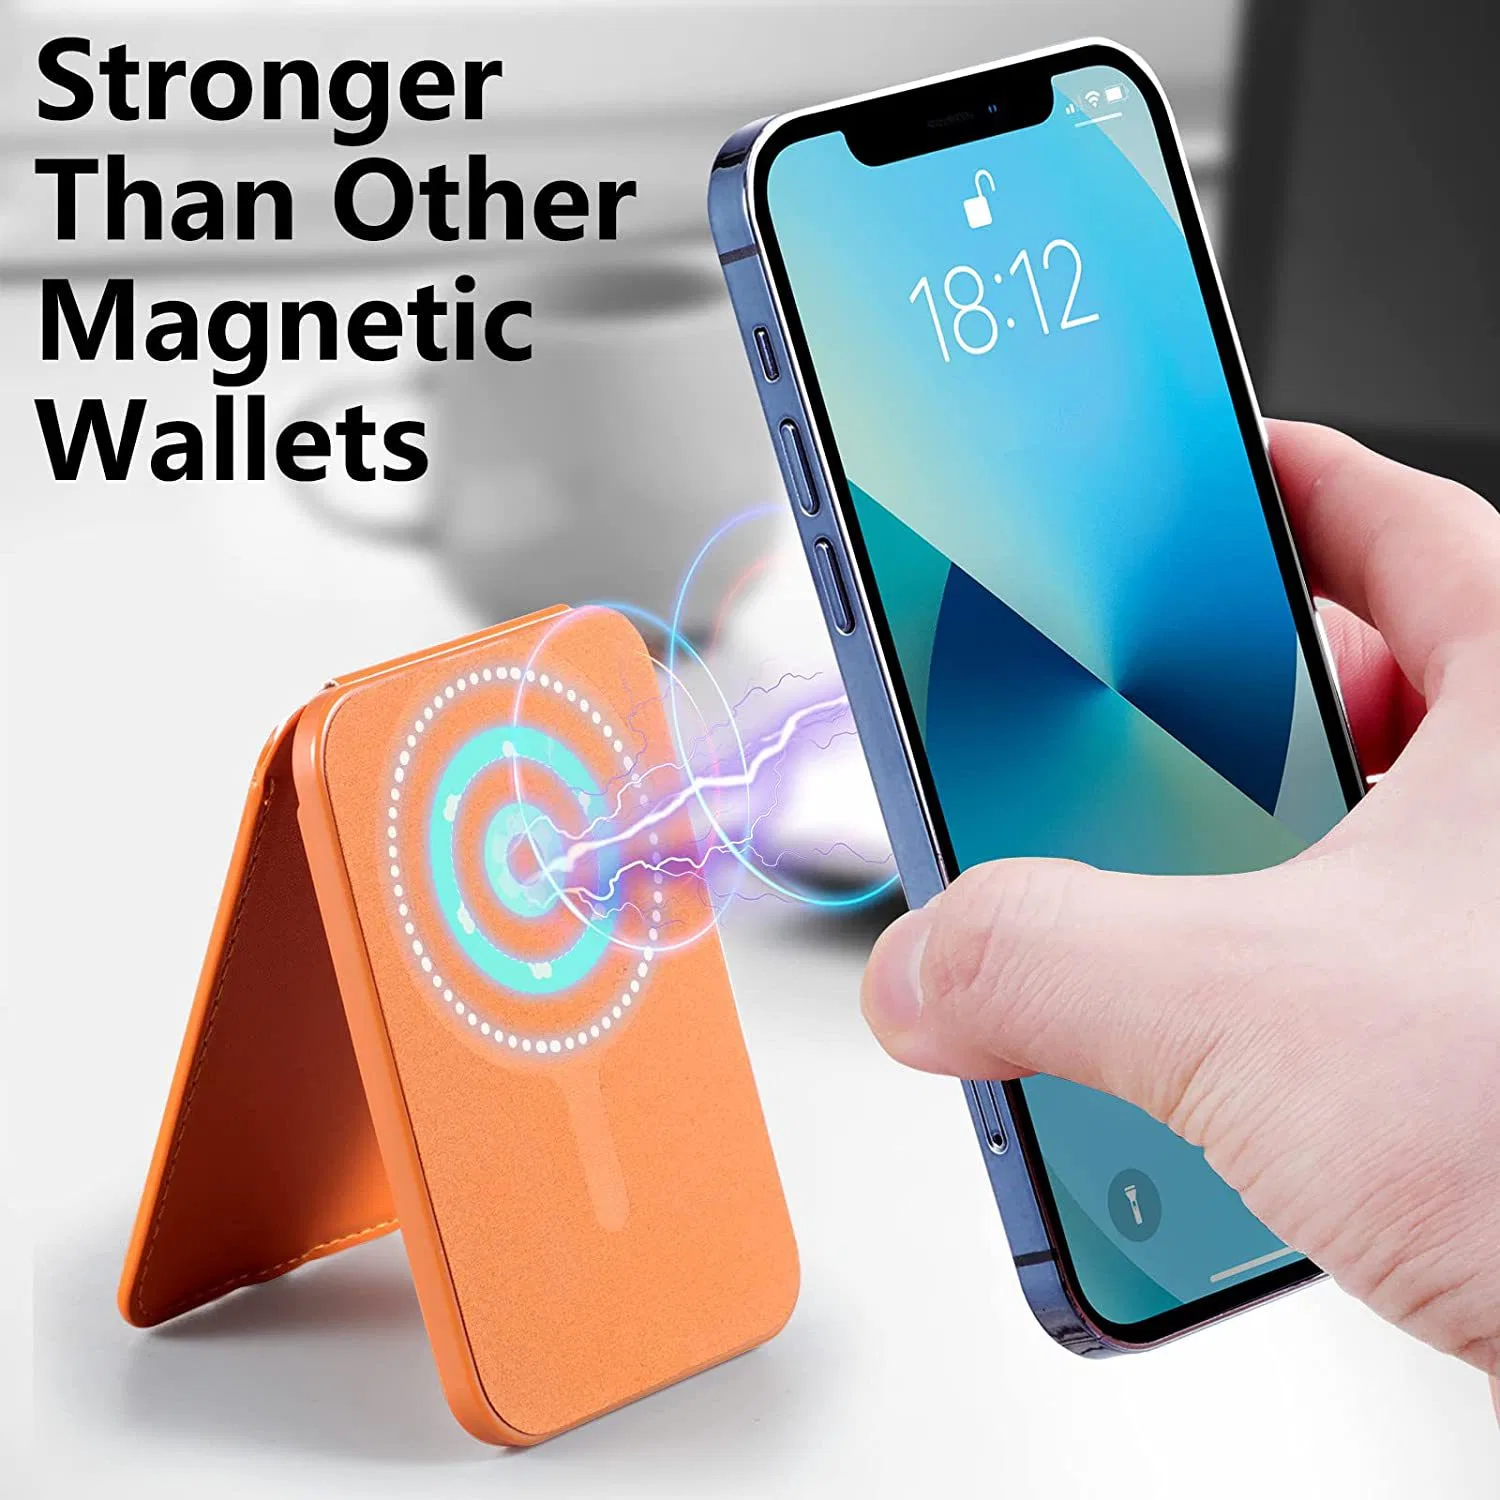 2-in-1 Magnetic Phone Wallet Stick Card Holders for Phones